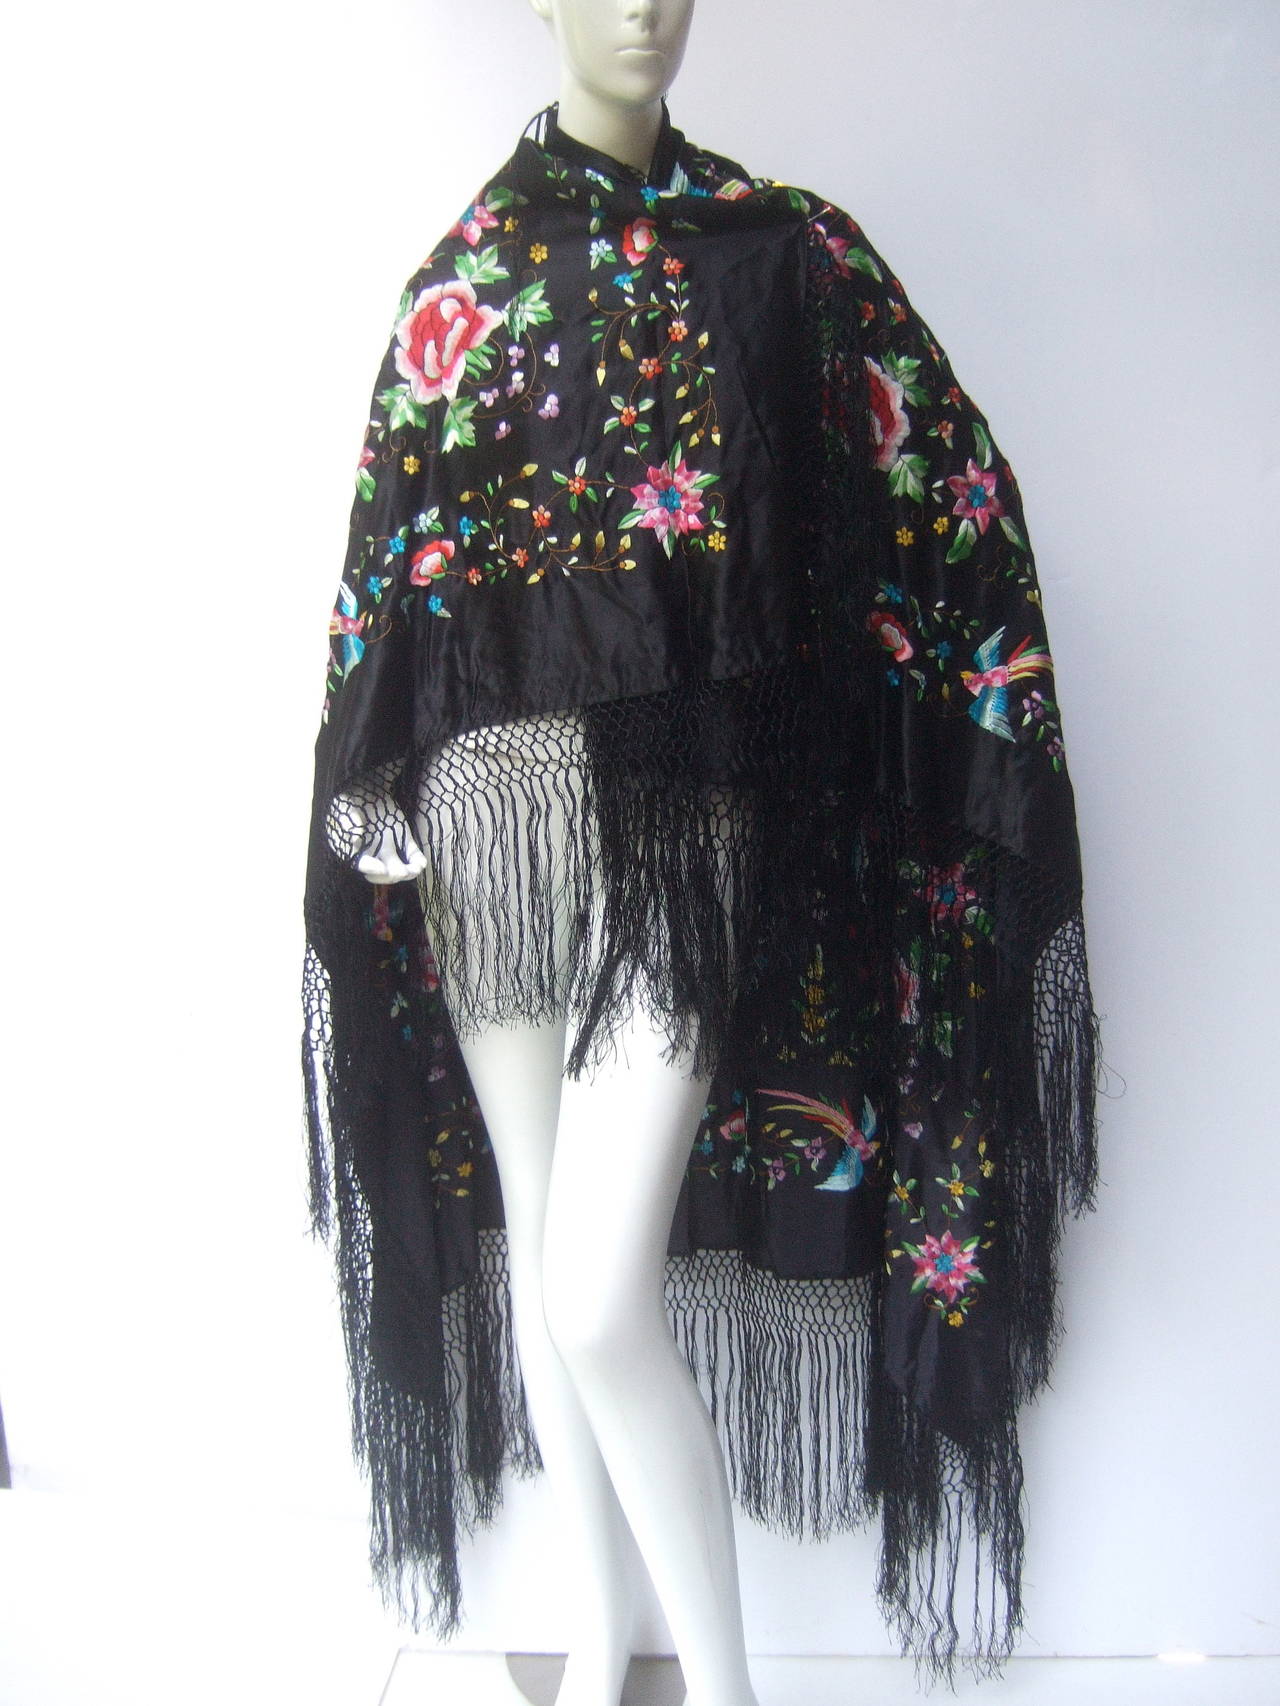 Exotic embroidered silk fringe shawl c 1970s
The opulent black silk shawl is embellished 
with elaborate hand embroidery; illustrated 
with a garden of lush flowers with soaring 
birds gliding throughout of the maze of flower 
blooms

The